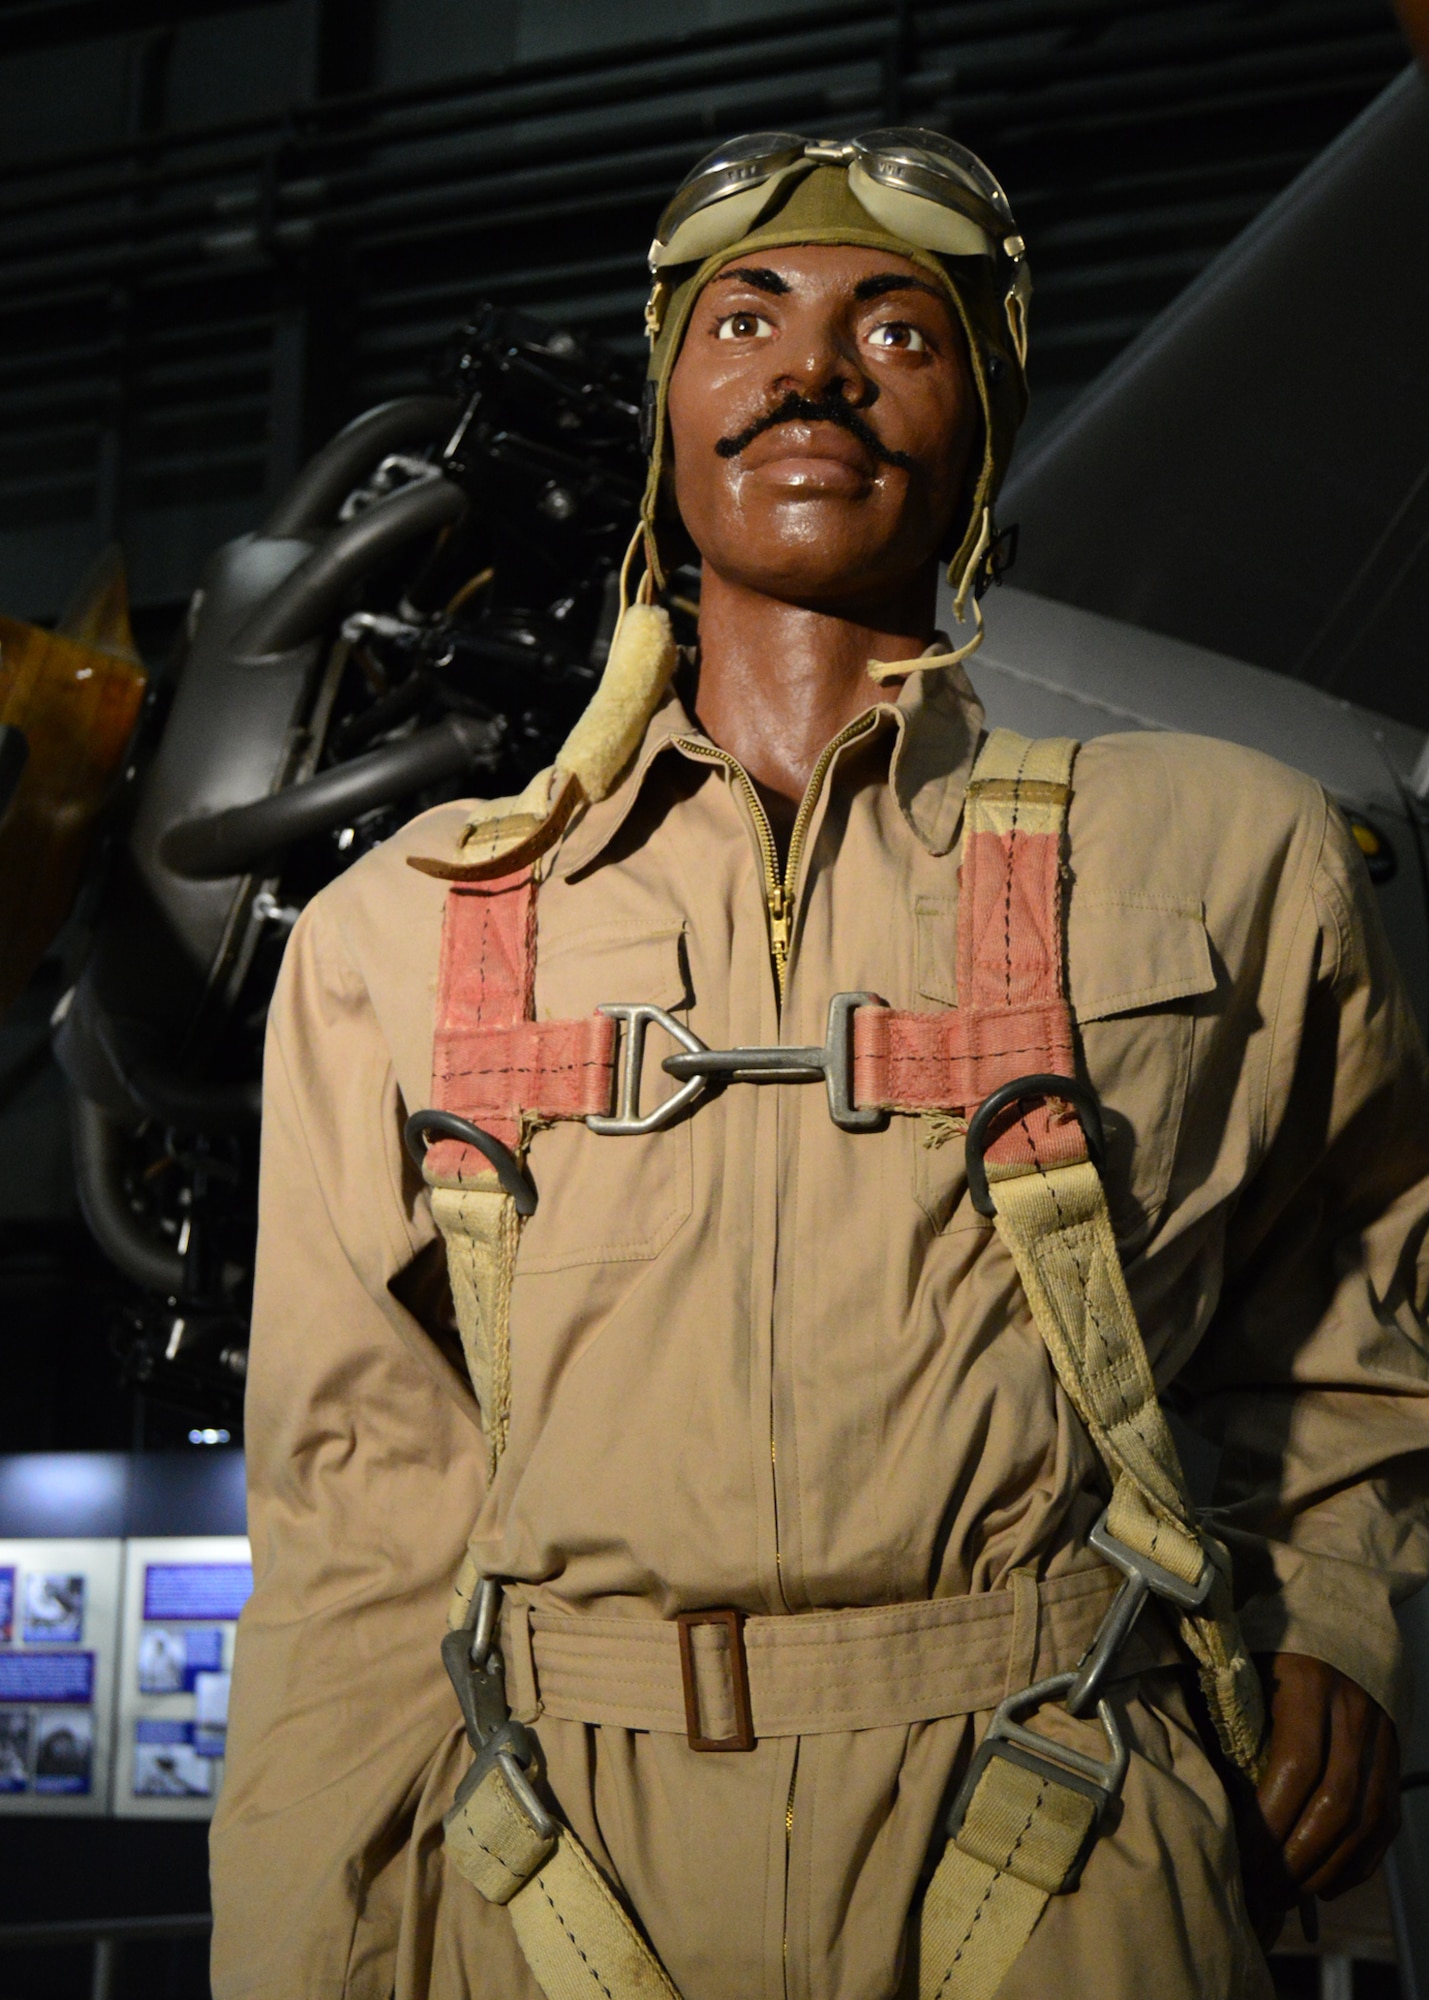 DAYTON, Ohio -- The Tuskegee Airmen diorama depicting a cadet and instructor on display in the WWII Gallery at the National Museum of the U.S. Air Force. (U.S. Air Force photo)
